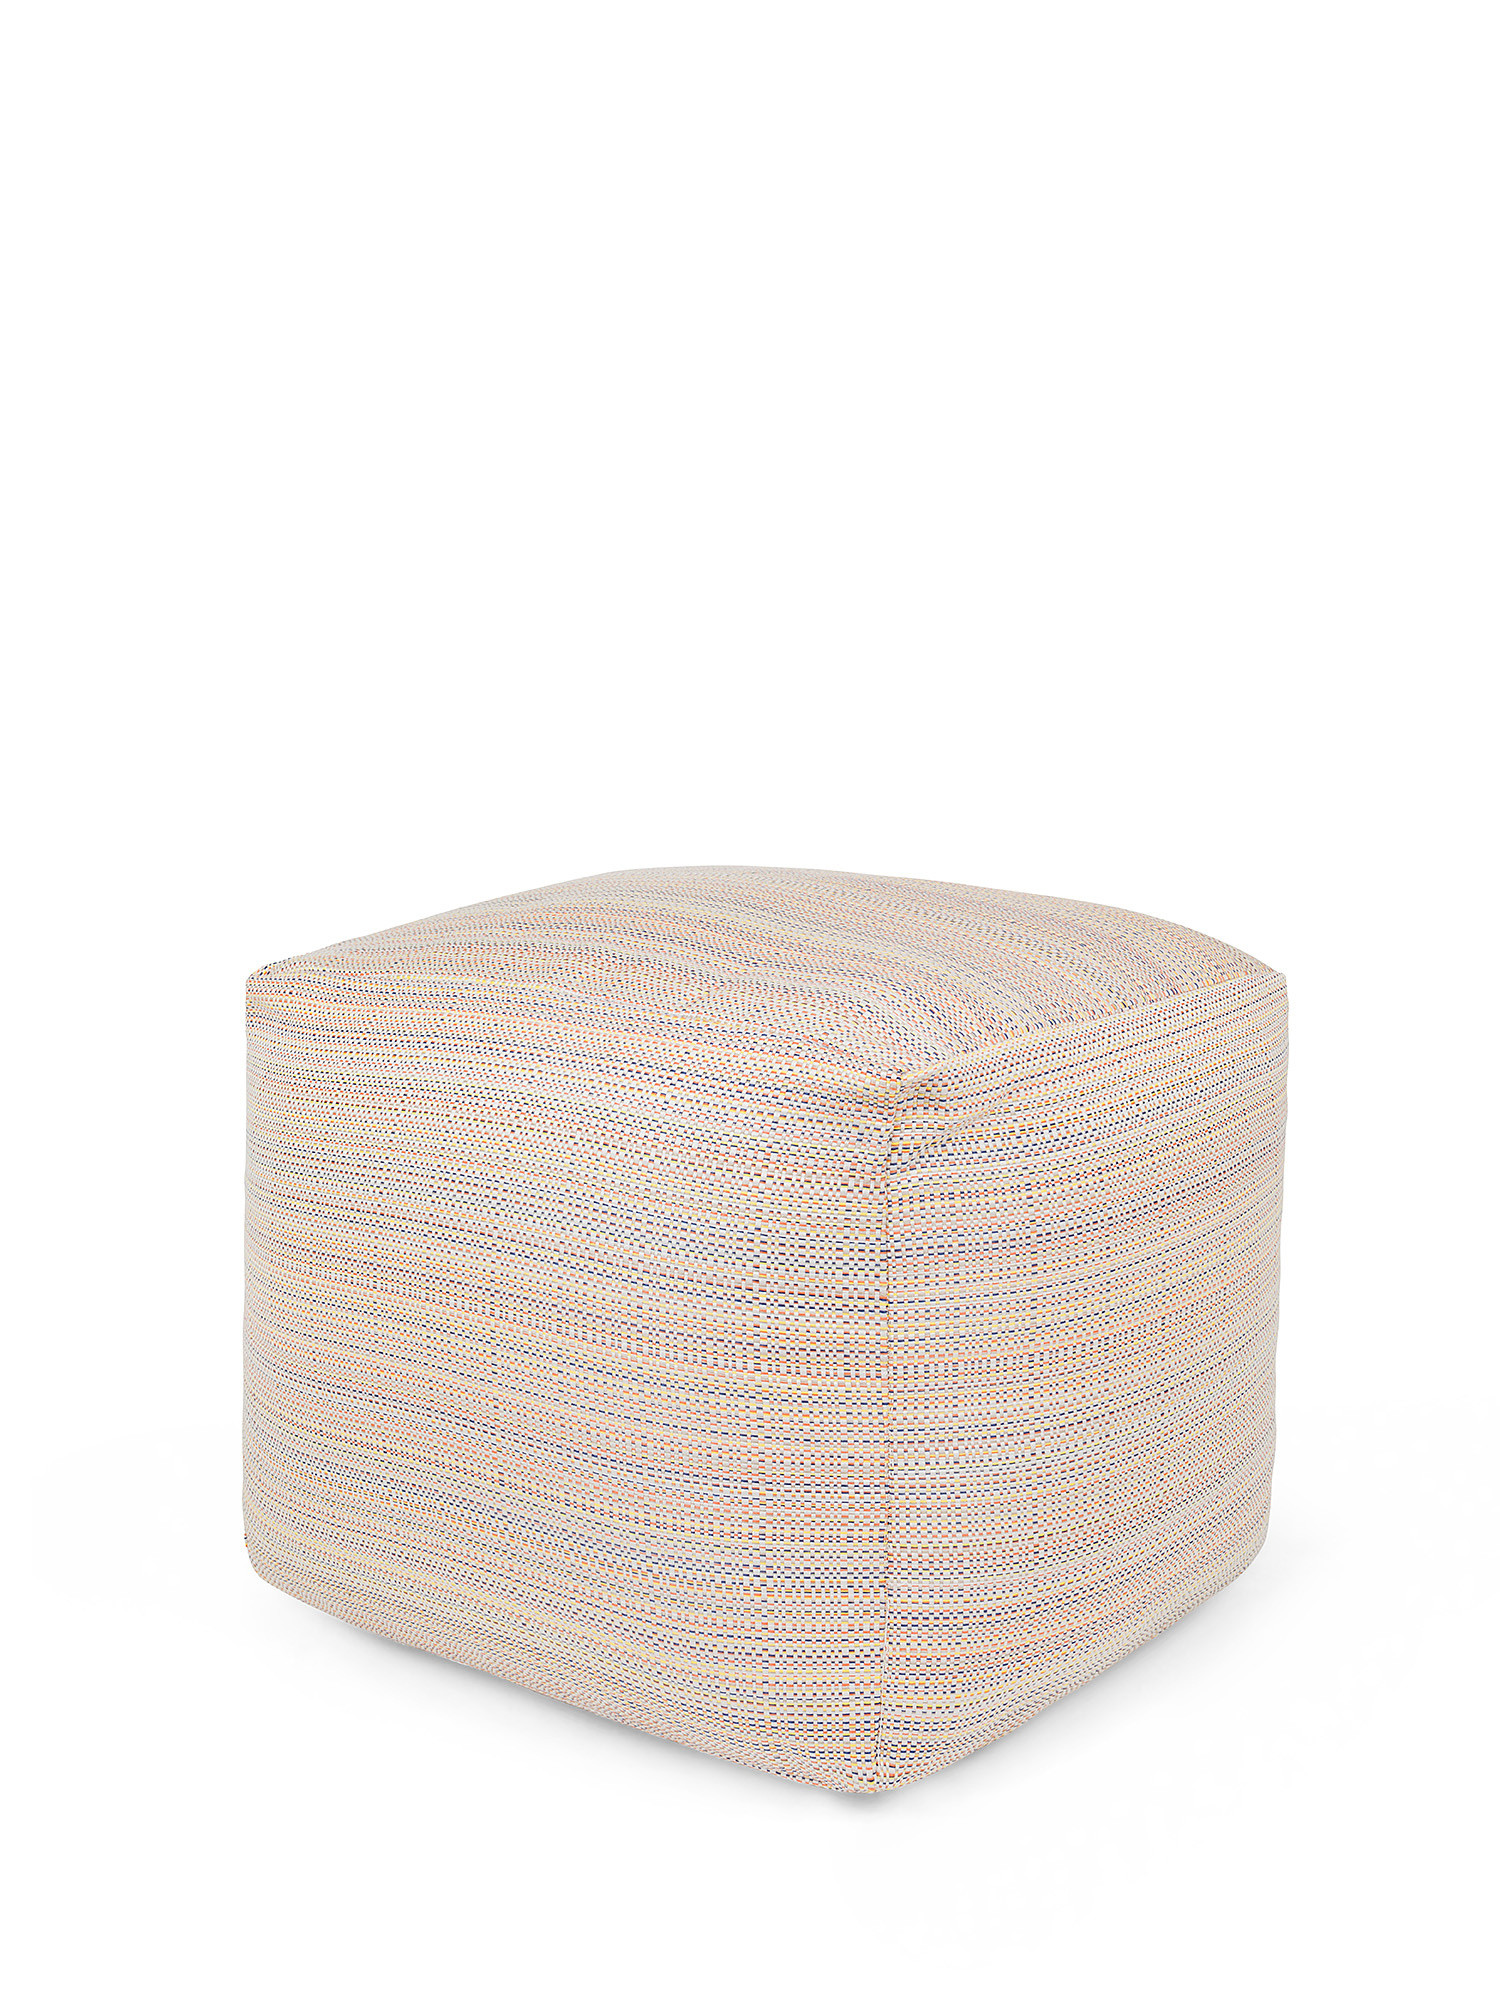 Striped patterned outdoor pouf, with zip and padding., Multicolor, large image number 0